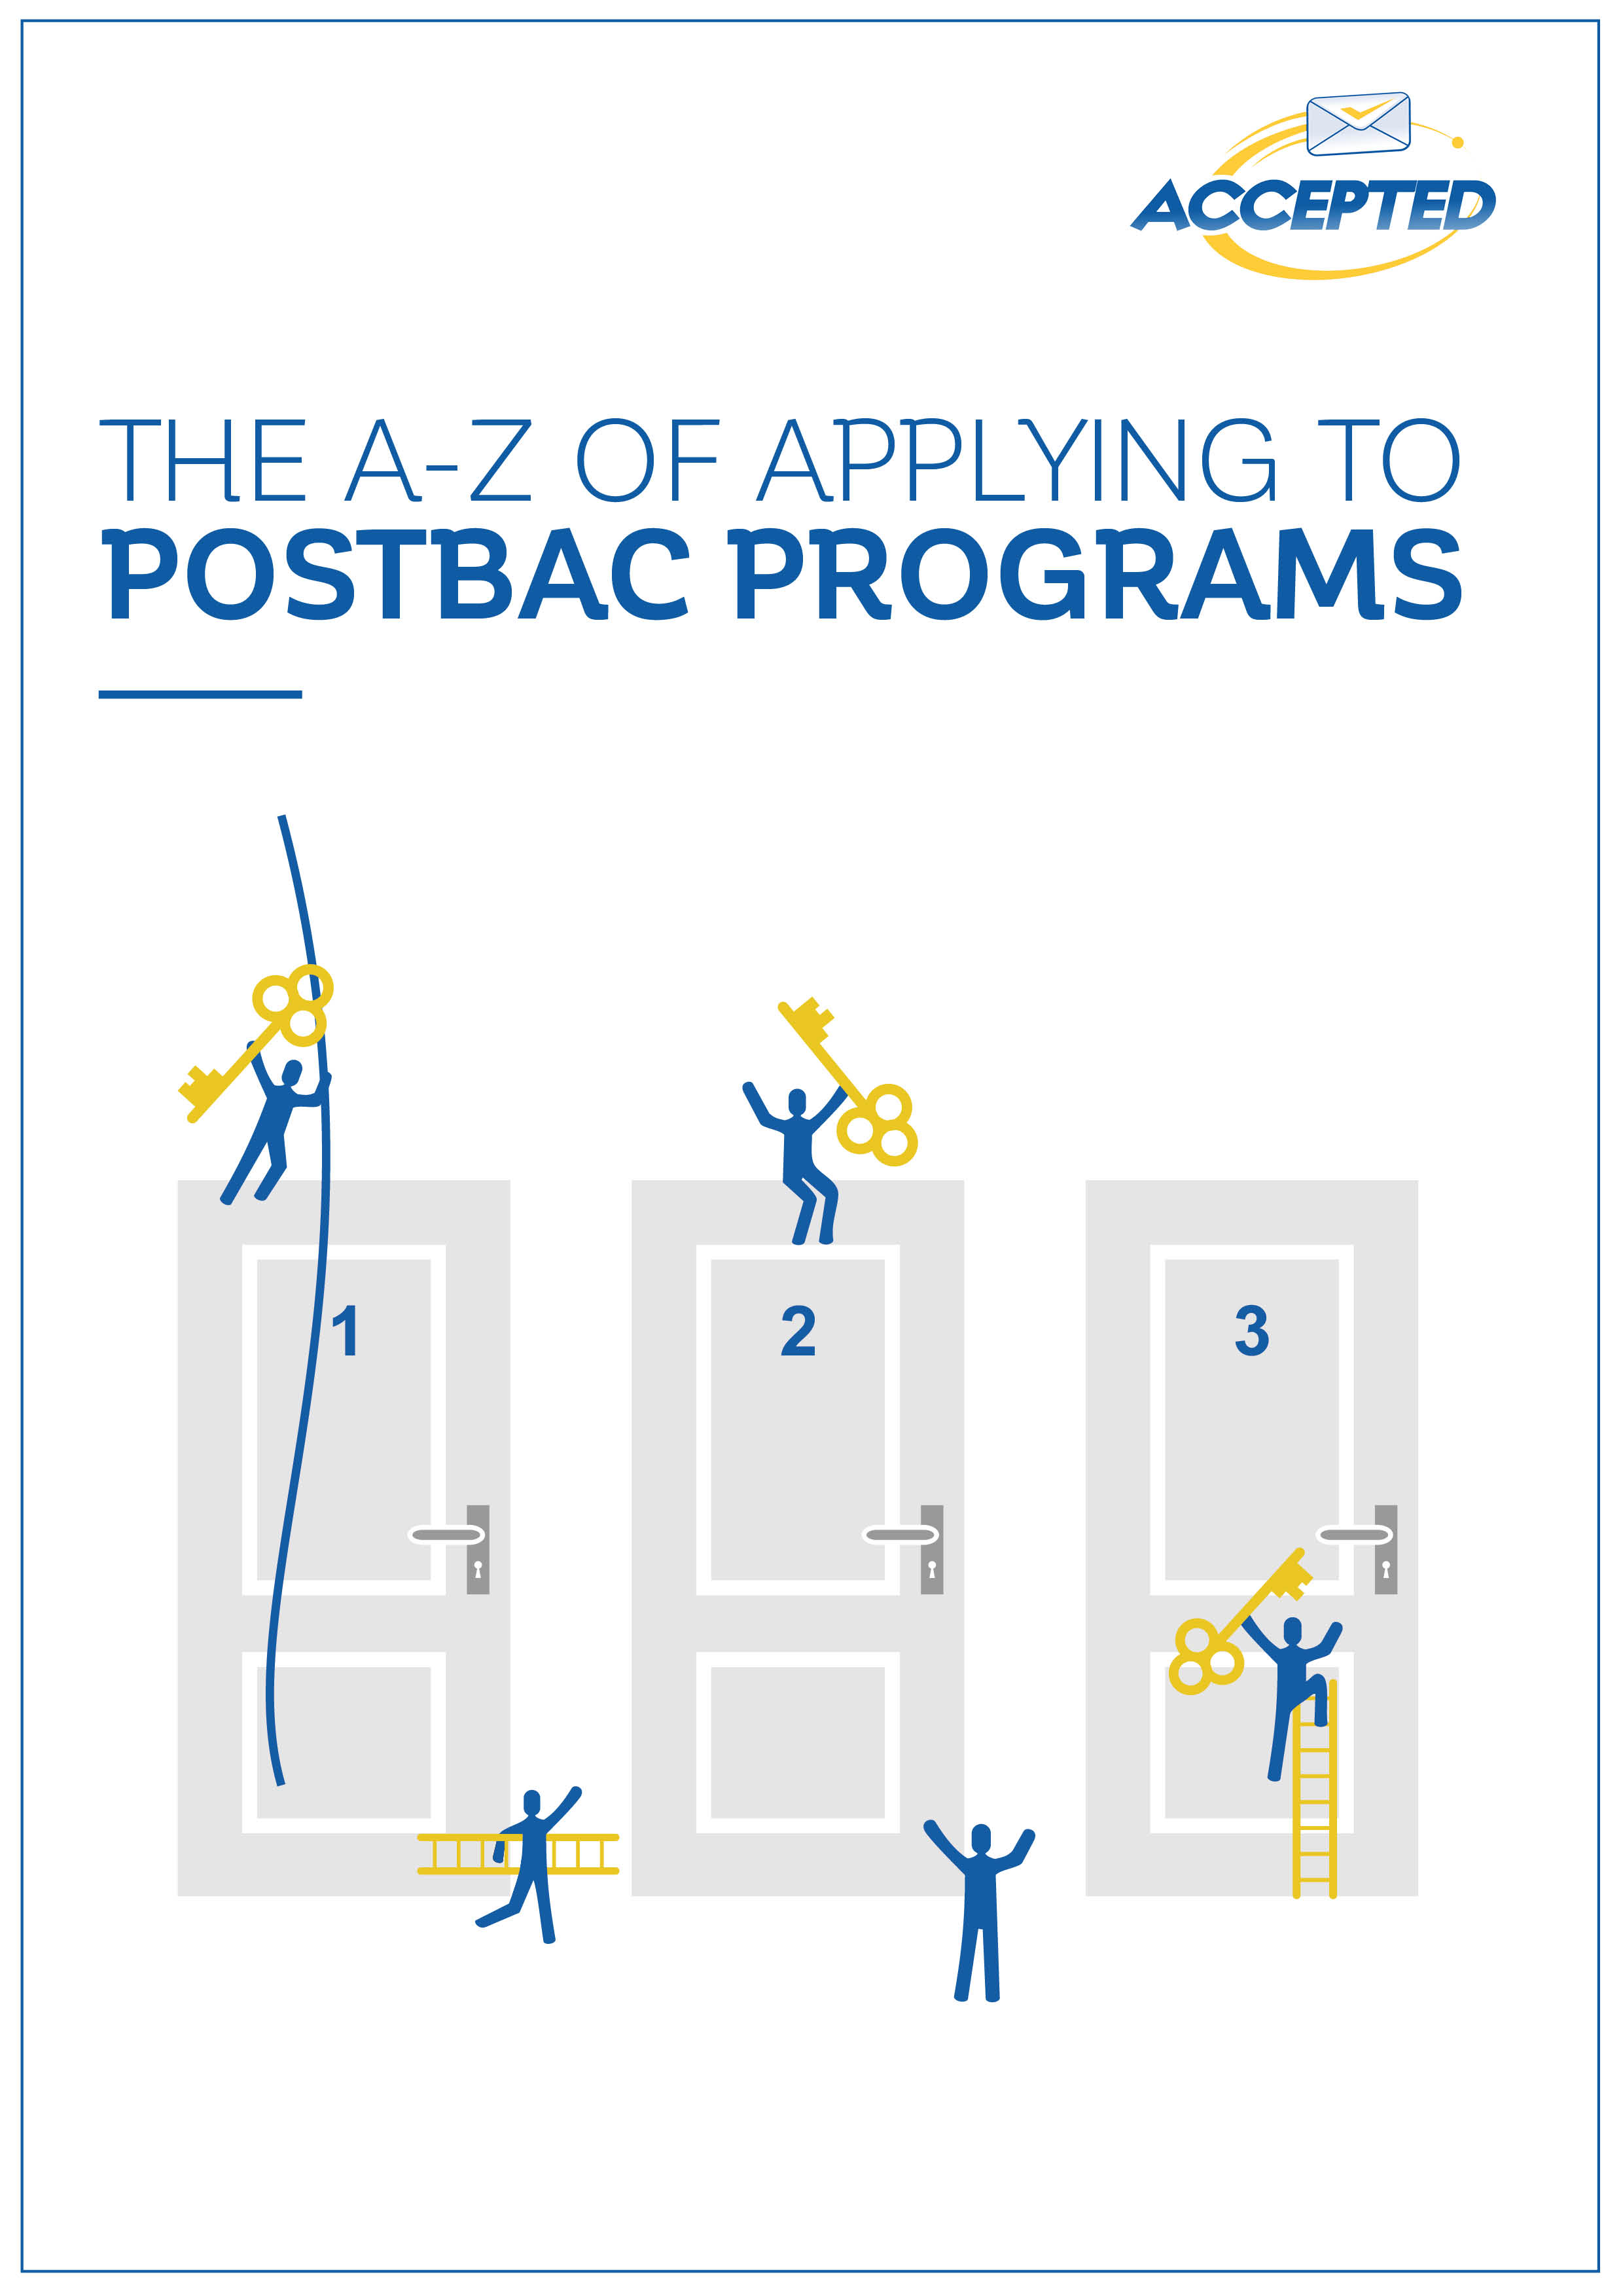 The A-Z of Applying to Postbac Programs